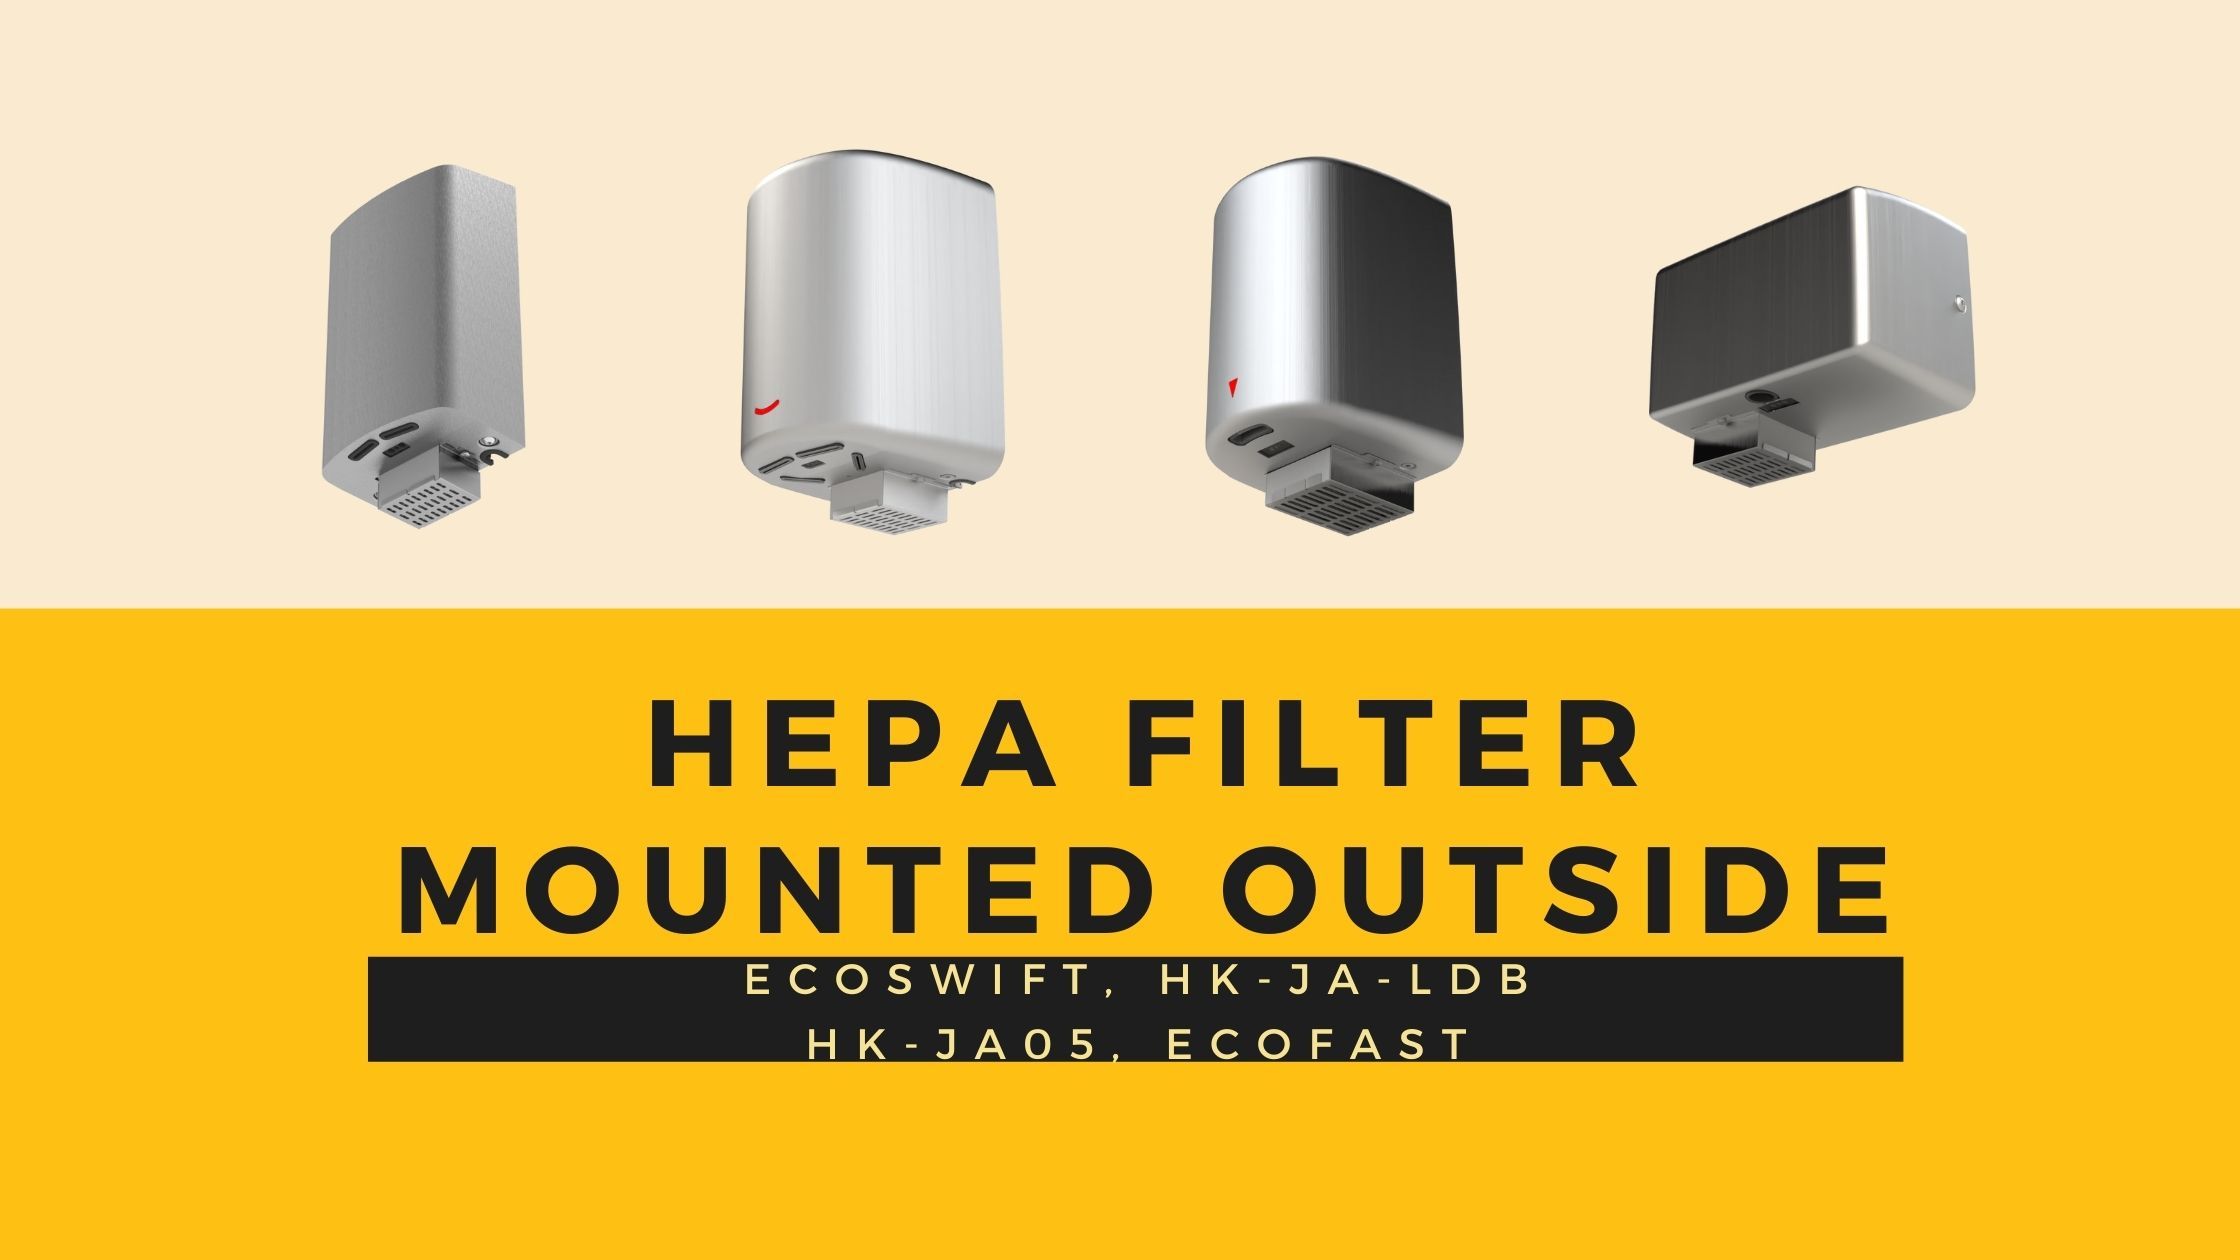 Hand Dryers With Heap Filter Building Outside